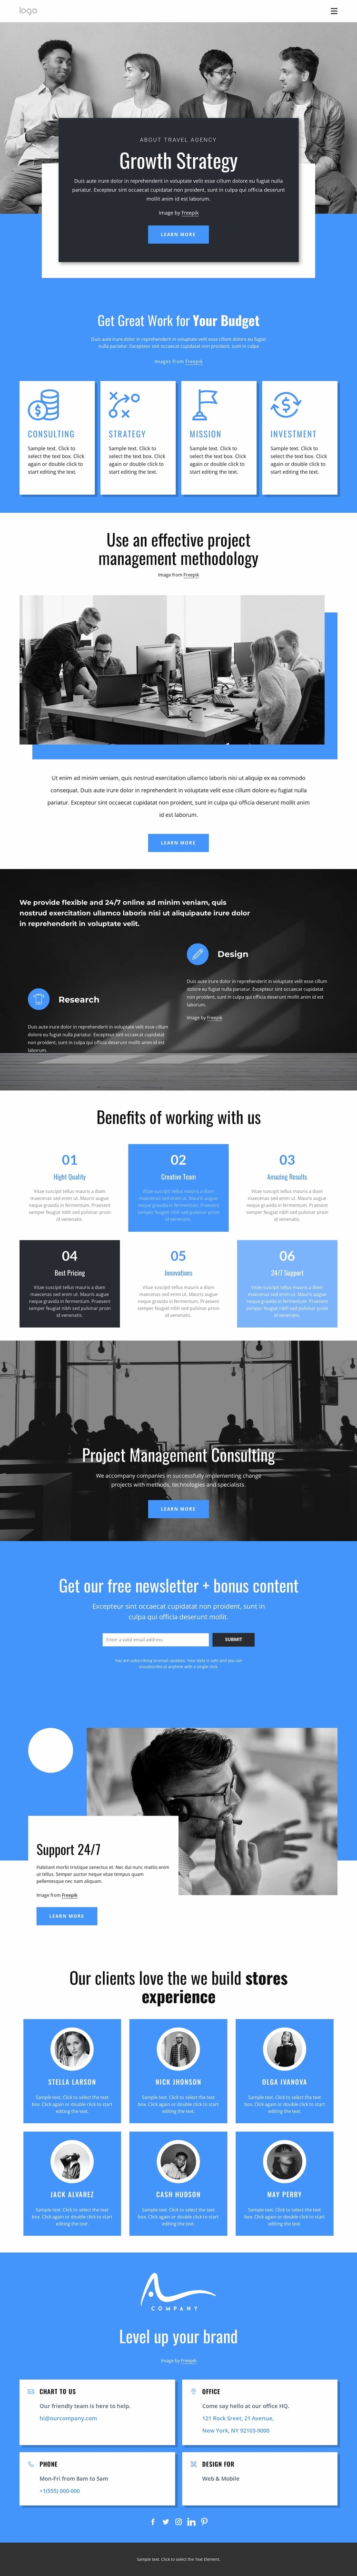 Growth strategy consulting company Website Design